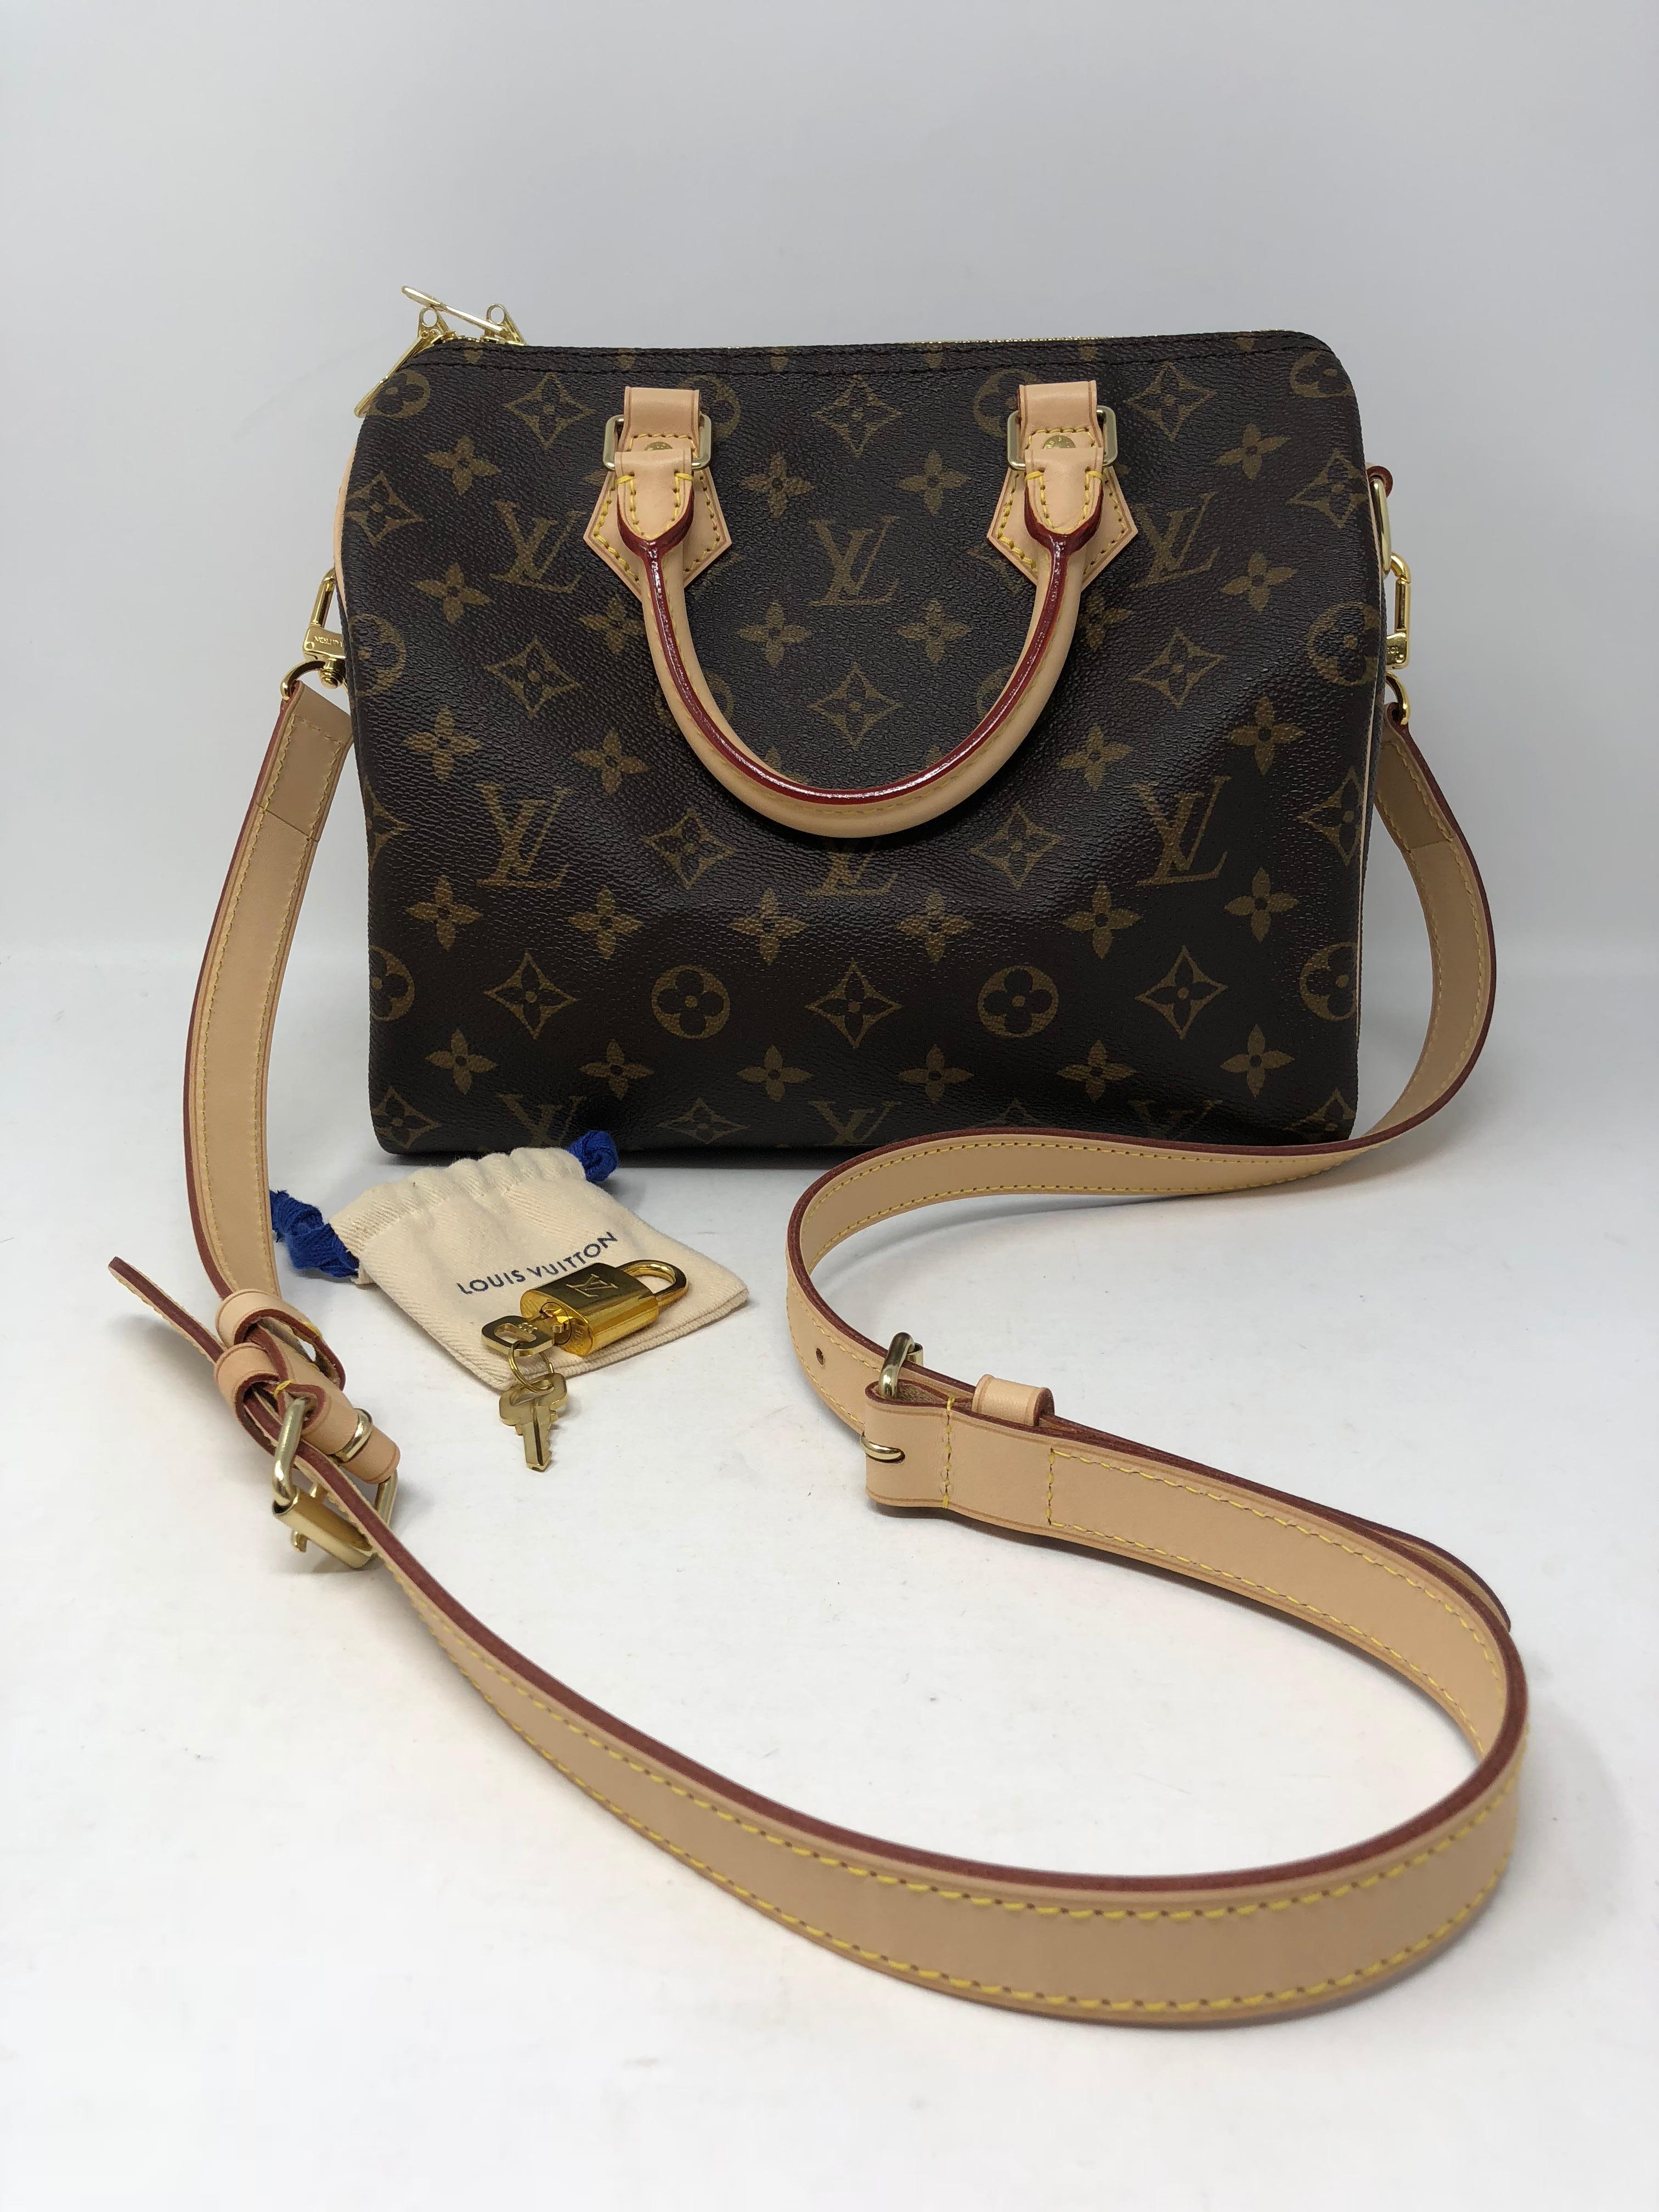 Louis Vuitton Speedy 25 Bandouliere in classic monogram canvas. Sold out and limited. Discontinued Speedy in monogram. This is brand new and comes with strap, original dust cover, lock, keys, and box. Guaranteed authentic. The most classic style.